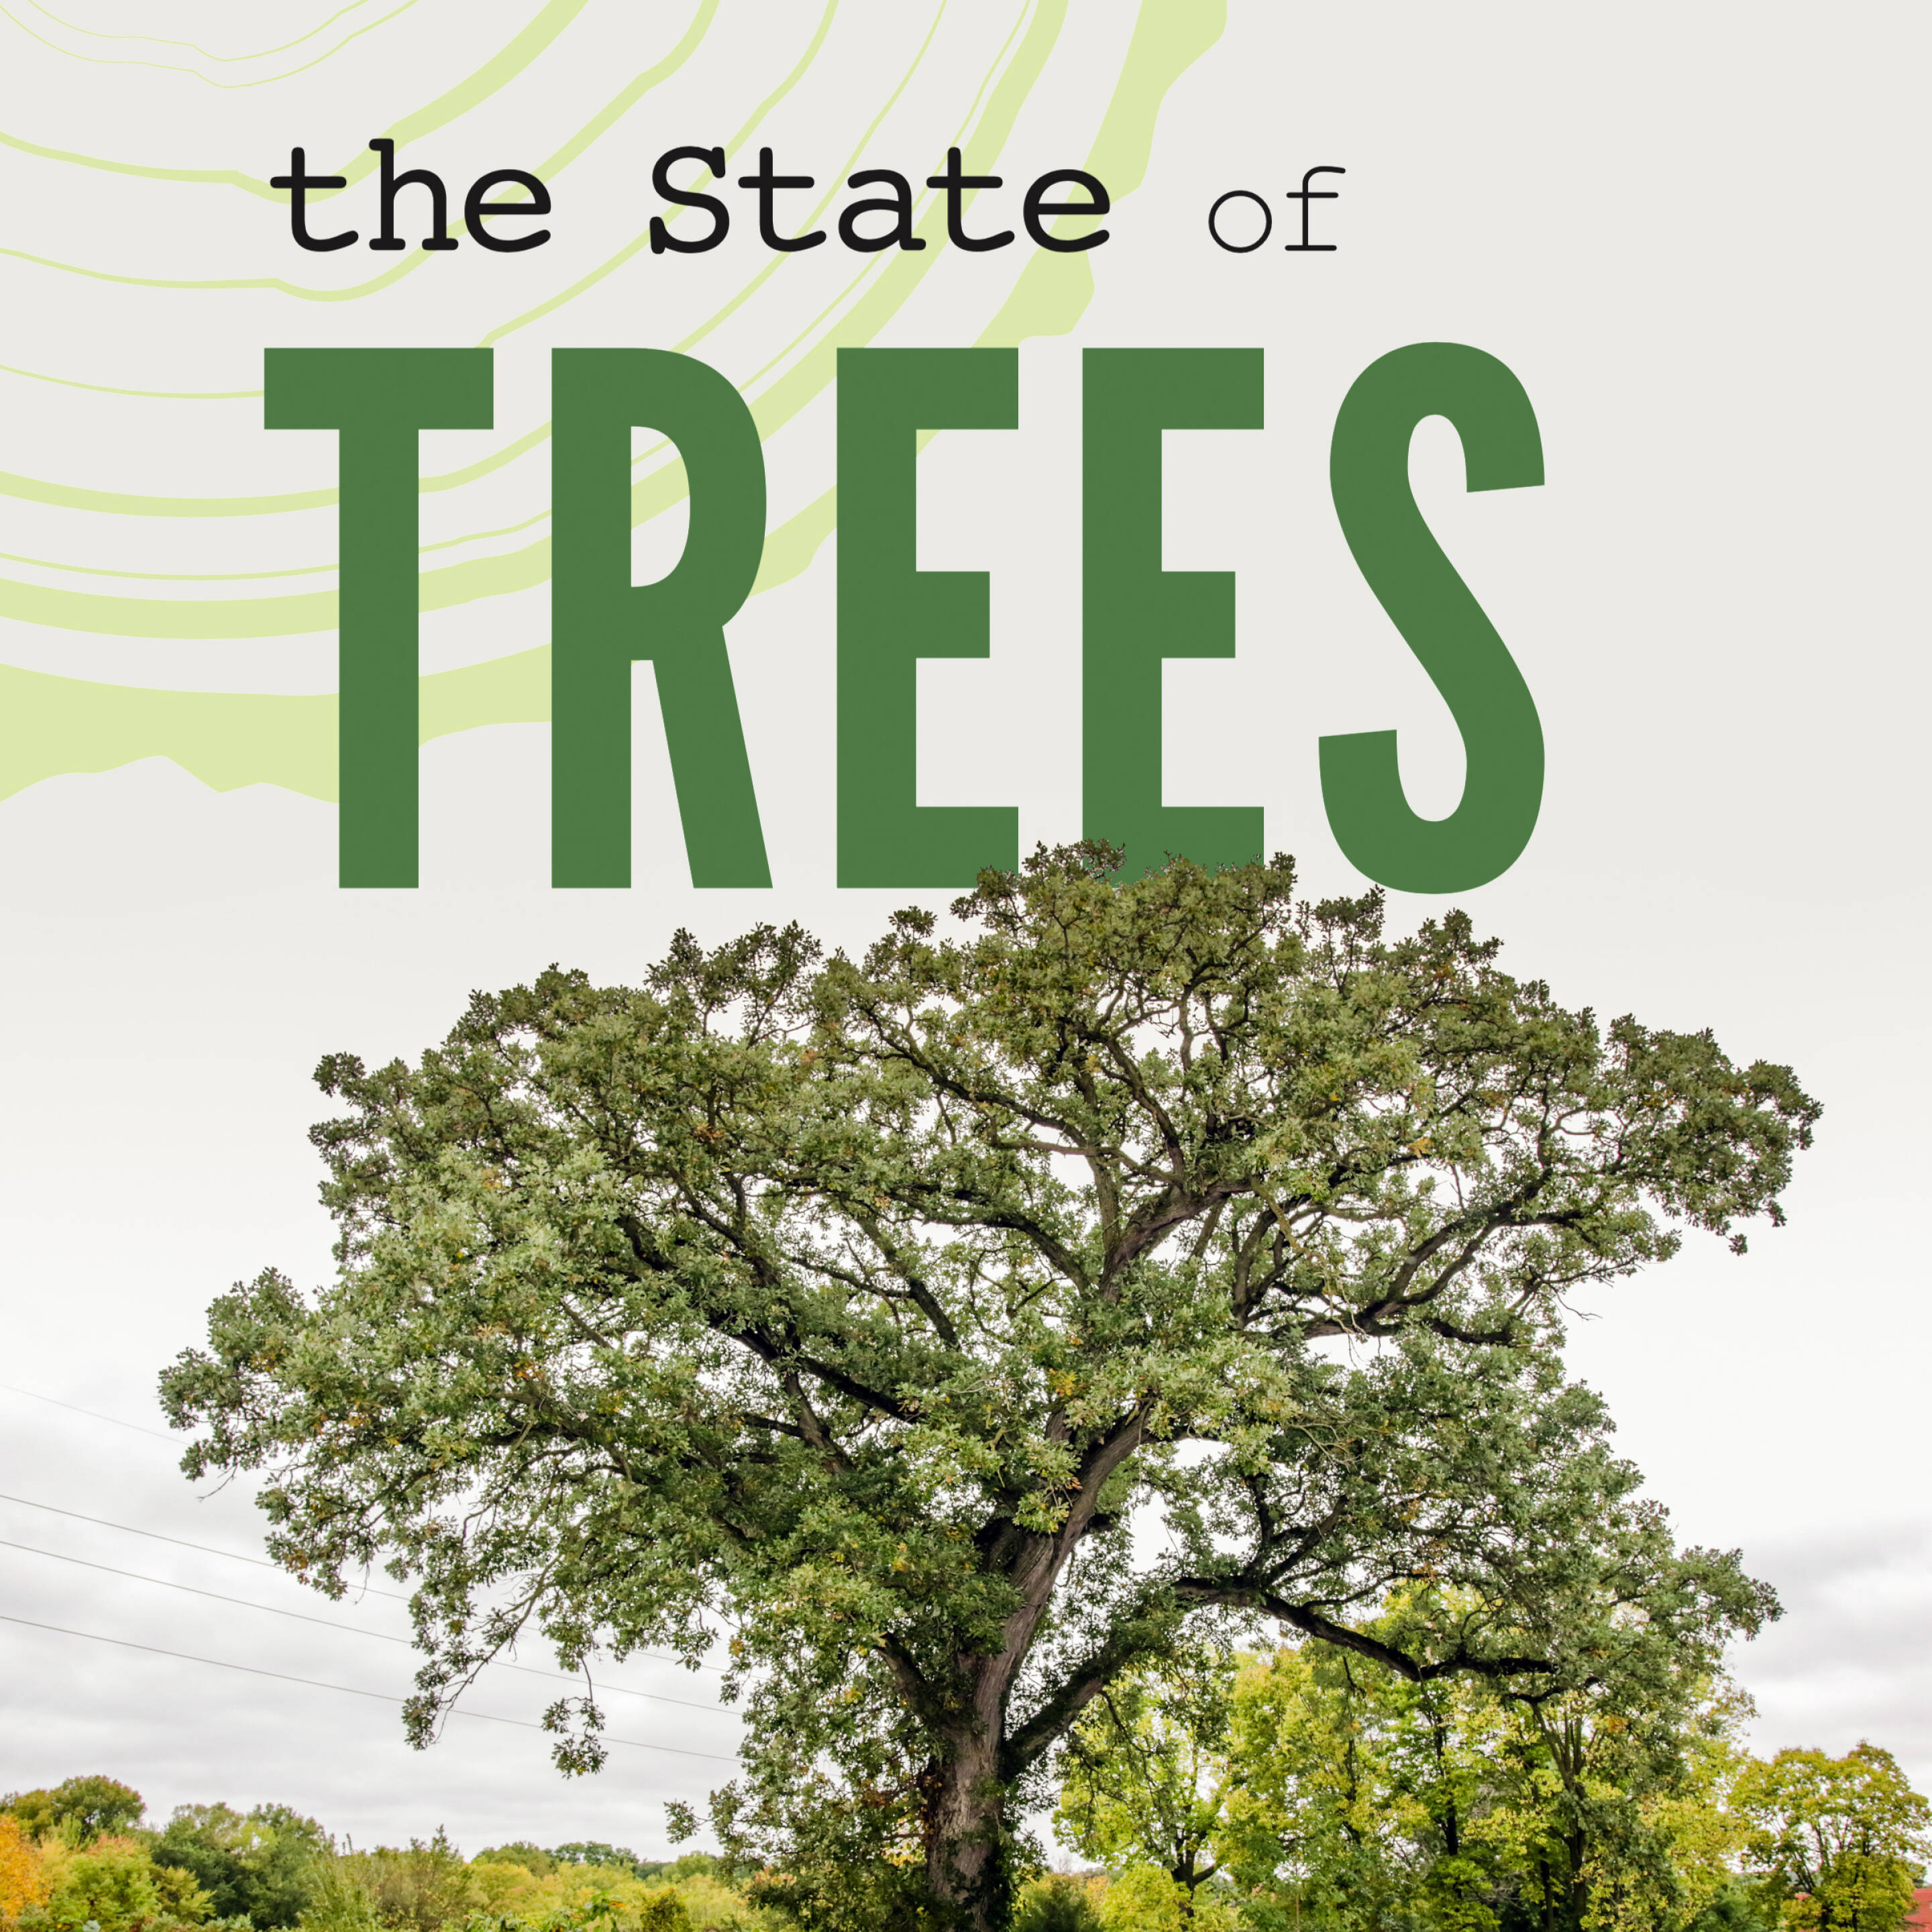 The State of Trees